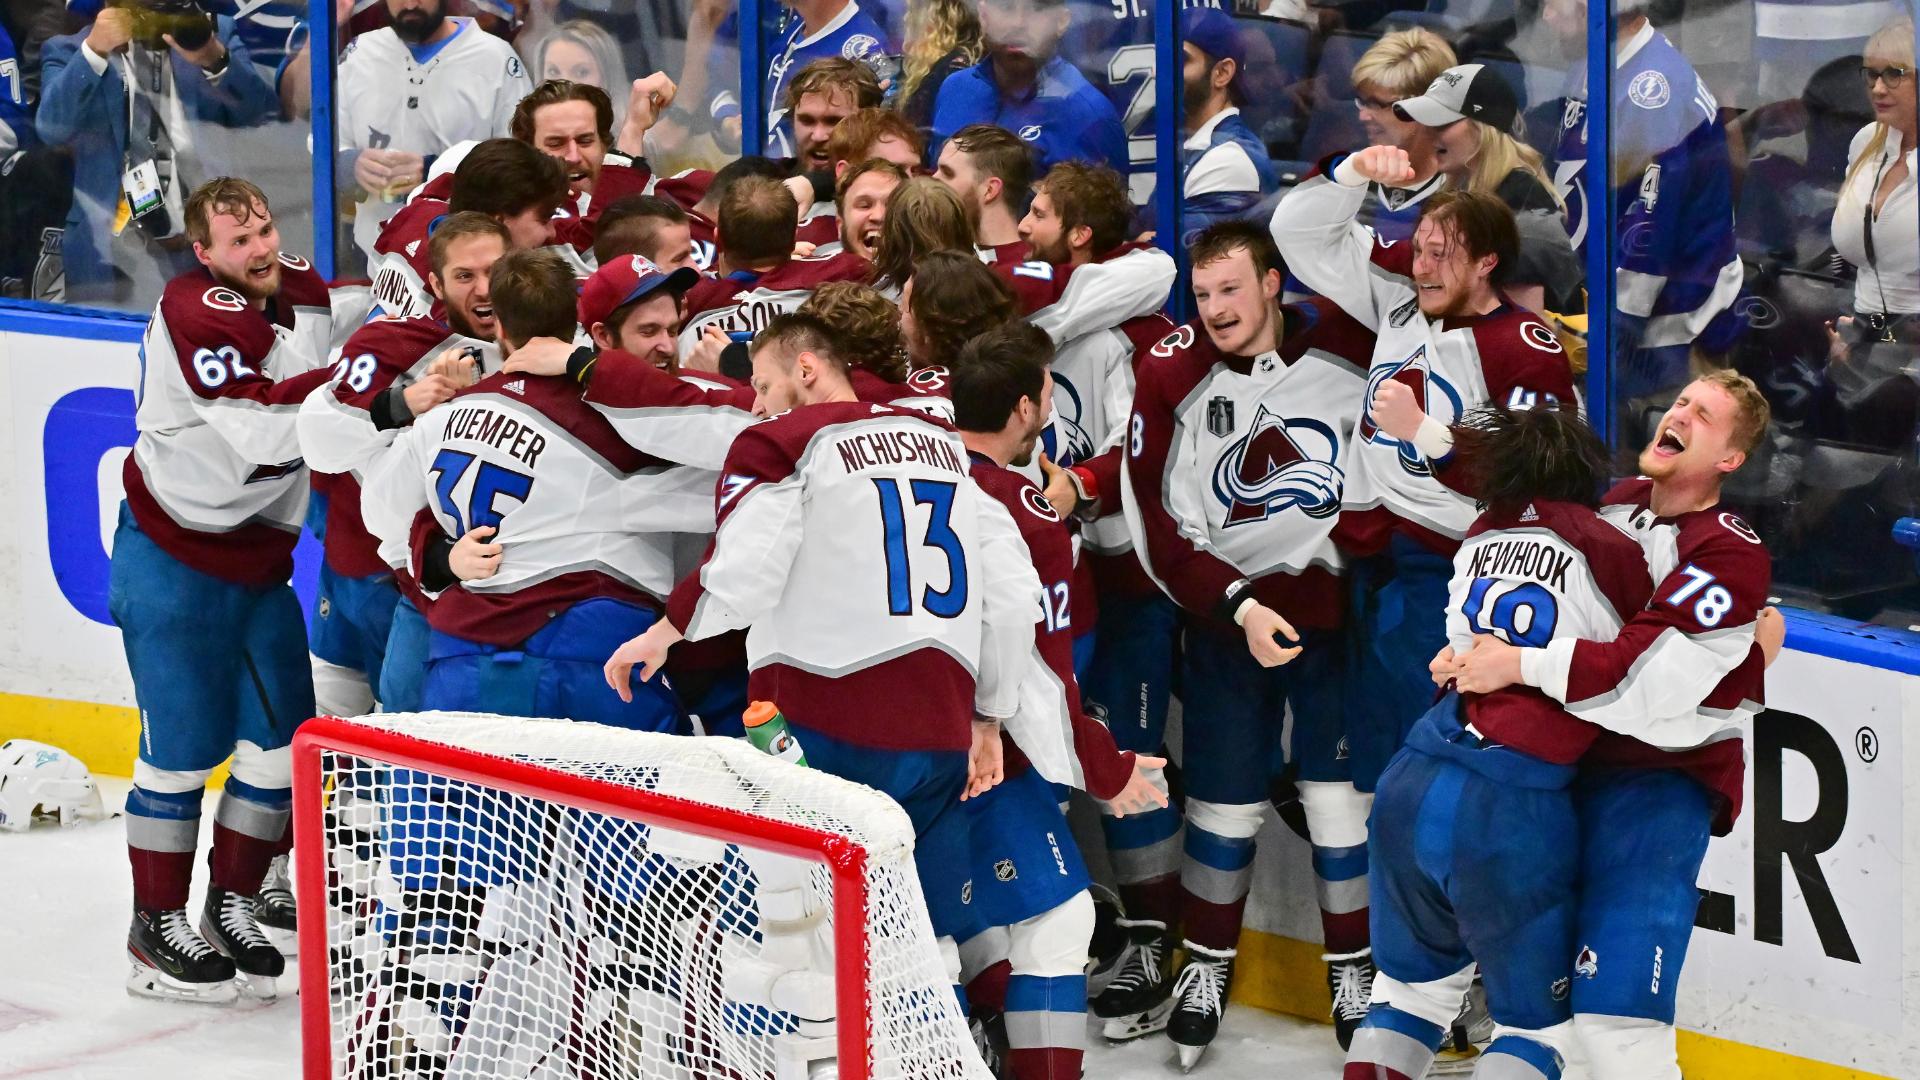 The moment the Avalanche won the Stanley Cup